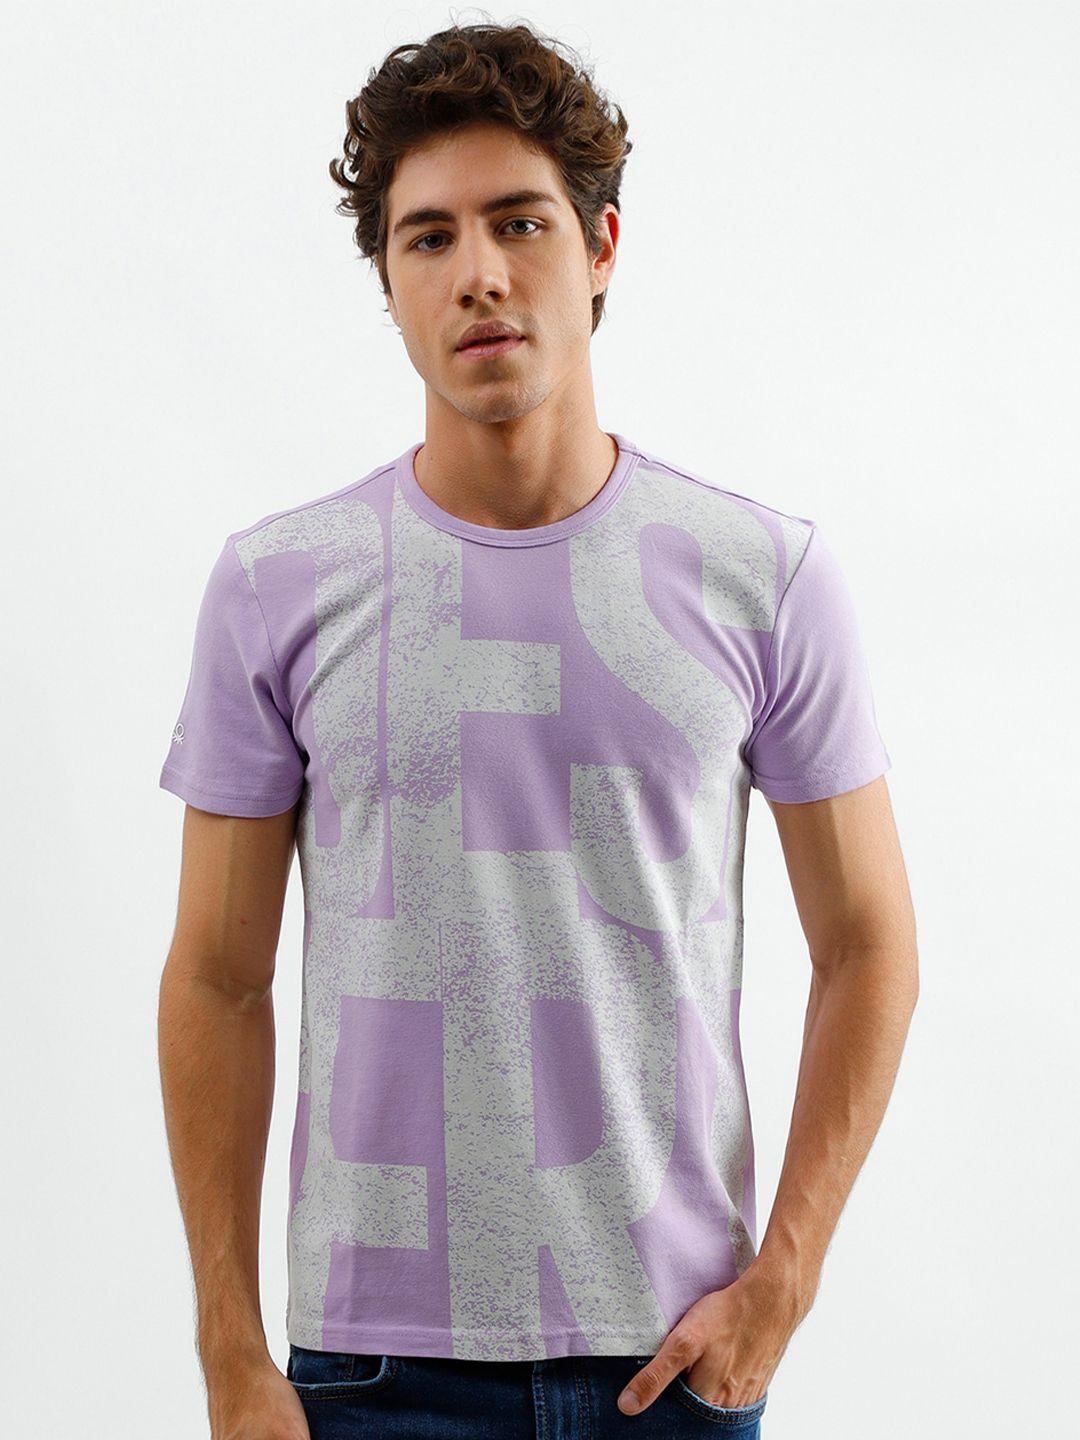 united colors of benetton men purple & grey typography printed t-shirt